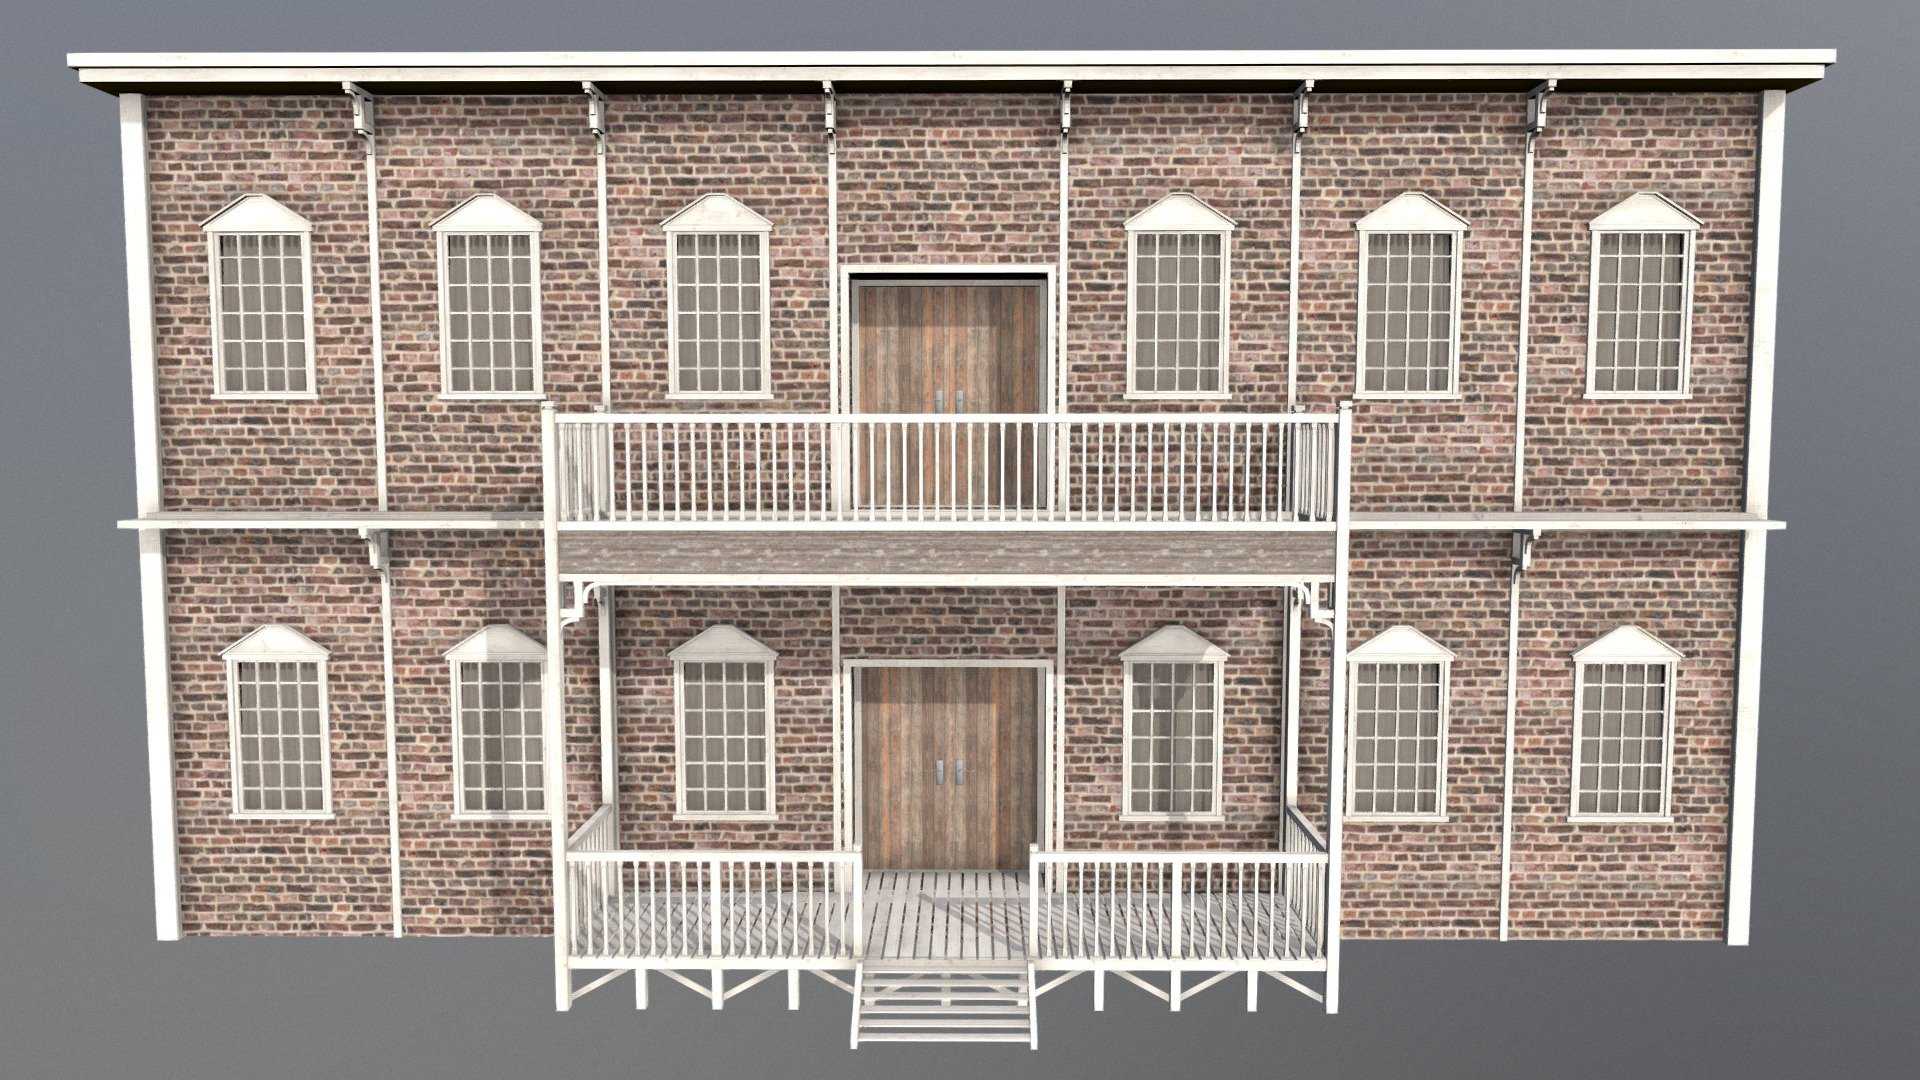 A Old Western style Hotel. Works great in any modern game engines or for rendering purposes. Includes exterior with multiple materials and 4k textures. The building consists of two storeys with multiple windows,doors and detail as well as an outdoor balcony on both levels.

Available in: fbx ,3ds ,obj ,mtl ,dae.

Textures are in 4096x4096 resolution:




-Diffuse

-Normal map

-Ambient Occlusion

-Baked Diffuse

For any help or inquiries please message me directly on Sketchfab or on my email: howardcoates95@gmail.com - Hotel - Buy Royalty Free 3D model by HowardCoates 3d model